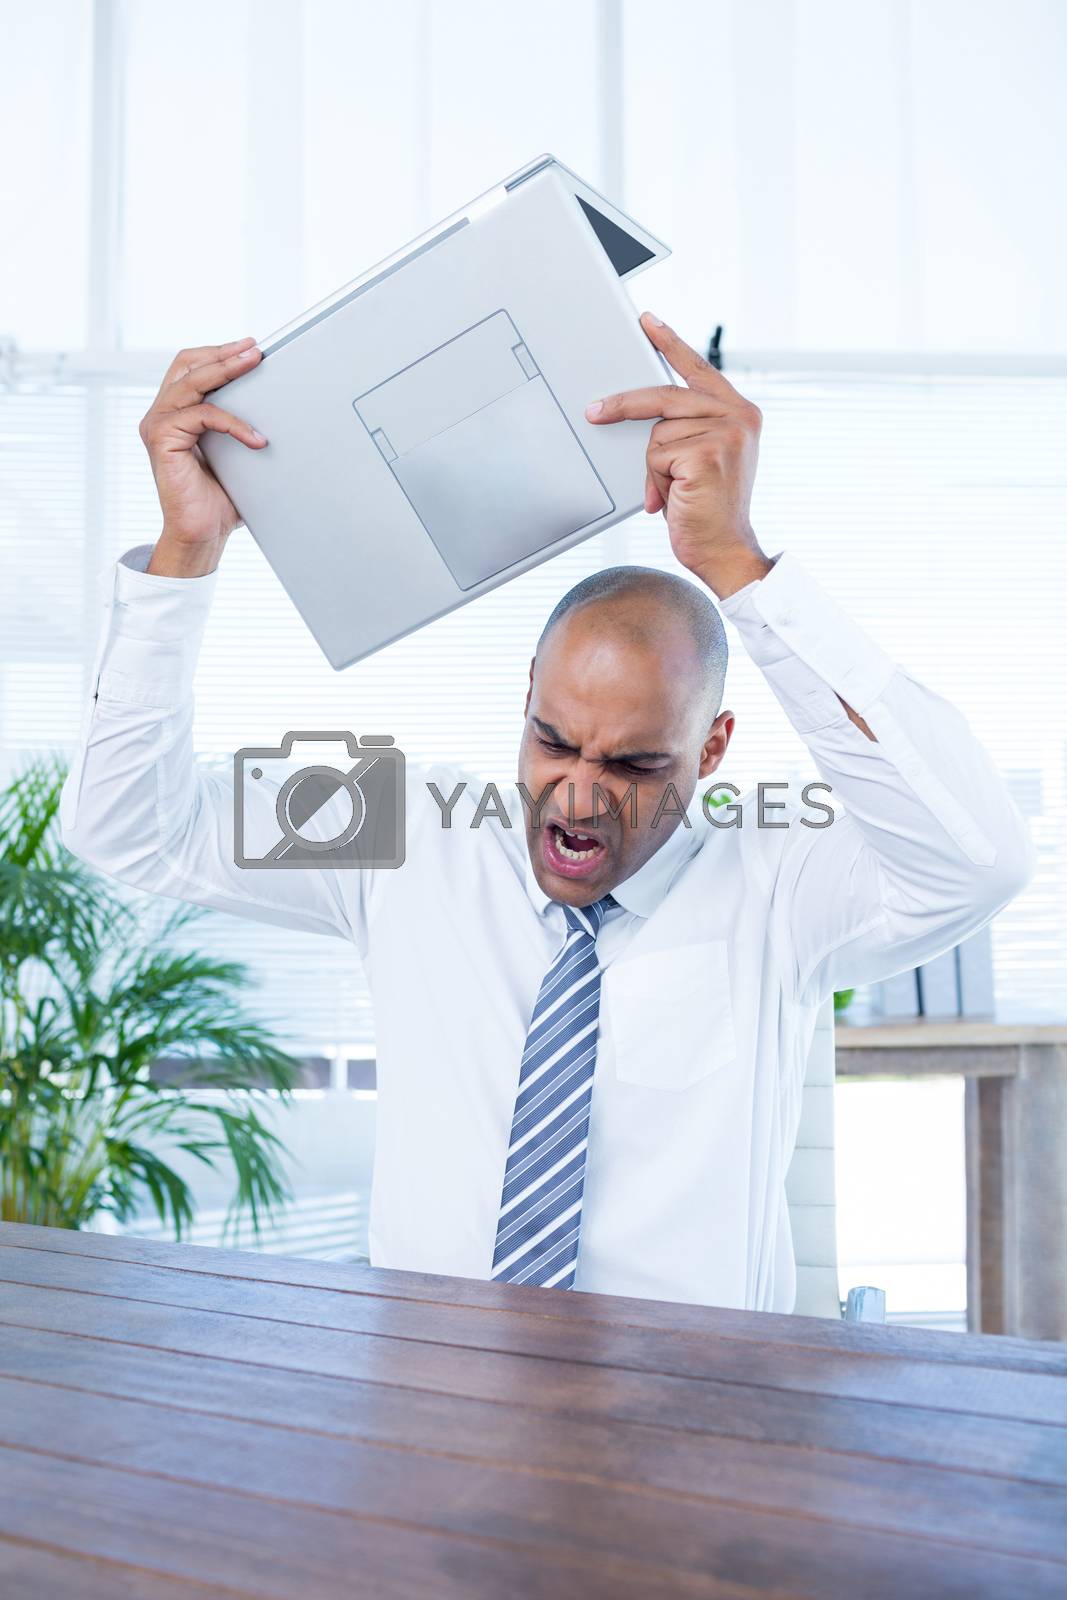 Royalty free image of Irritated businessman about to break his laptop by Wavebreakmedia